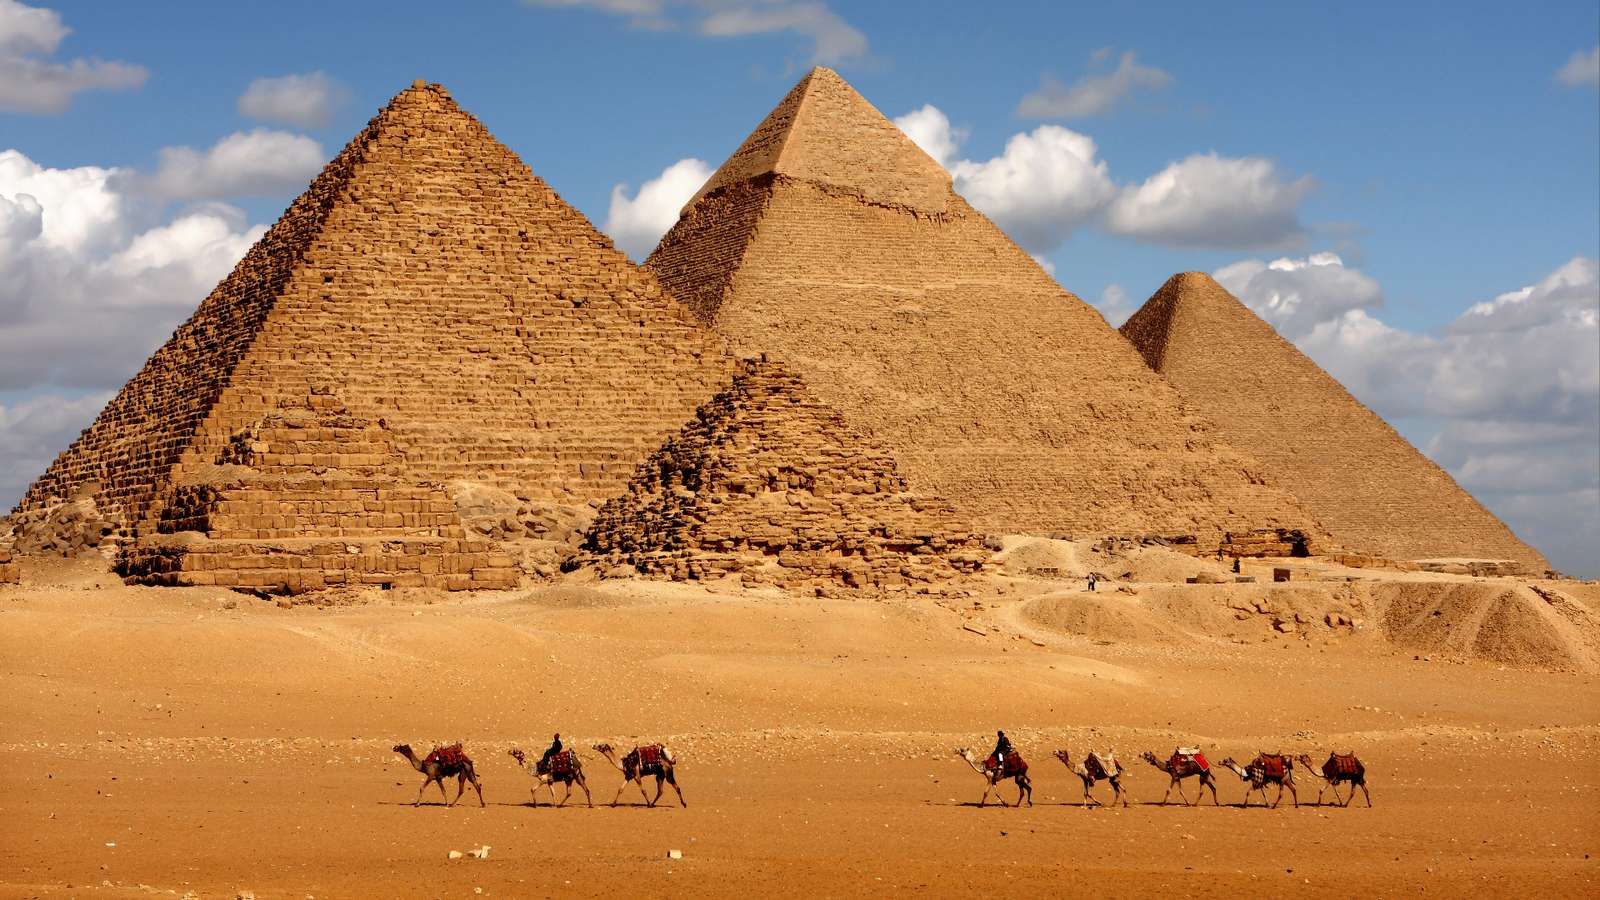 The pyramids online puzzle